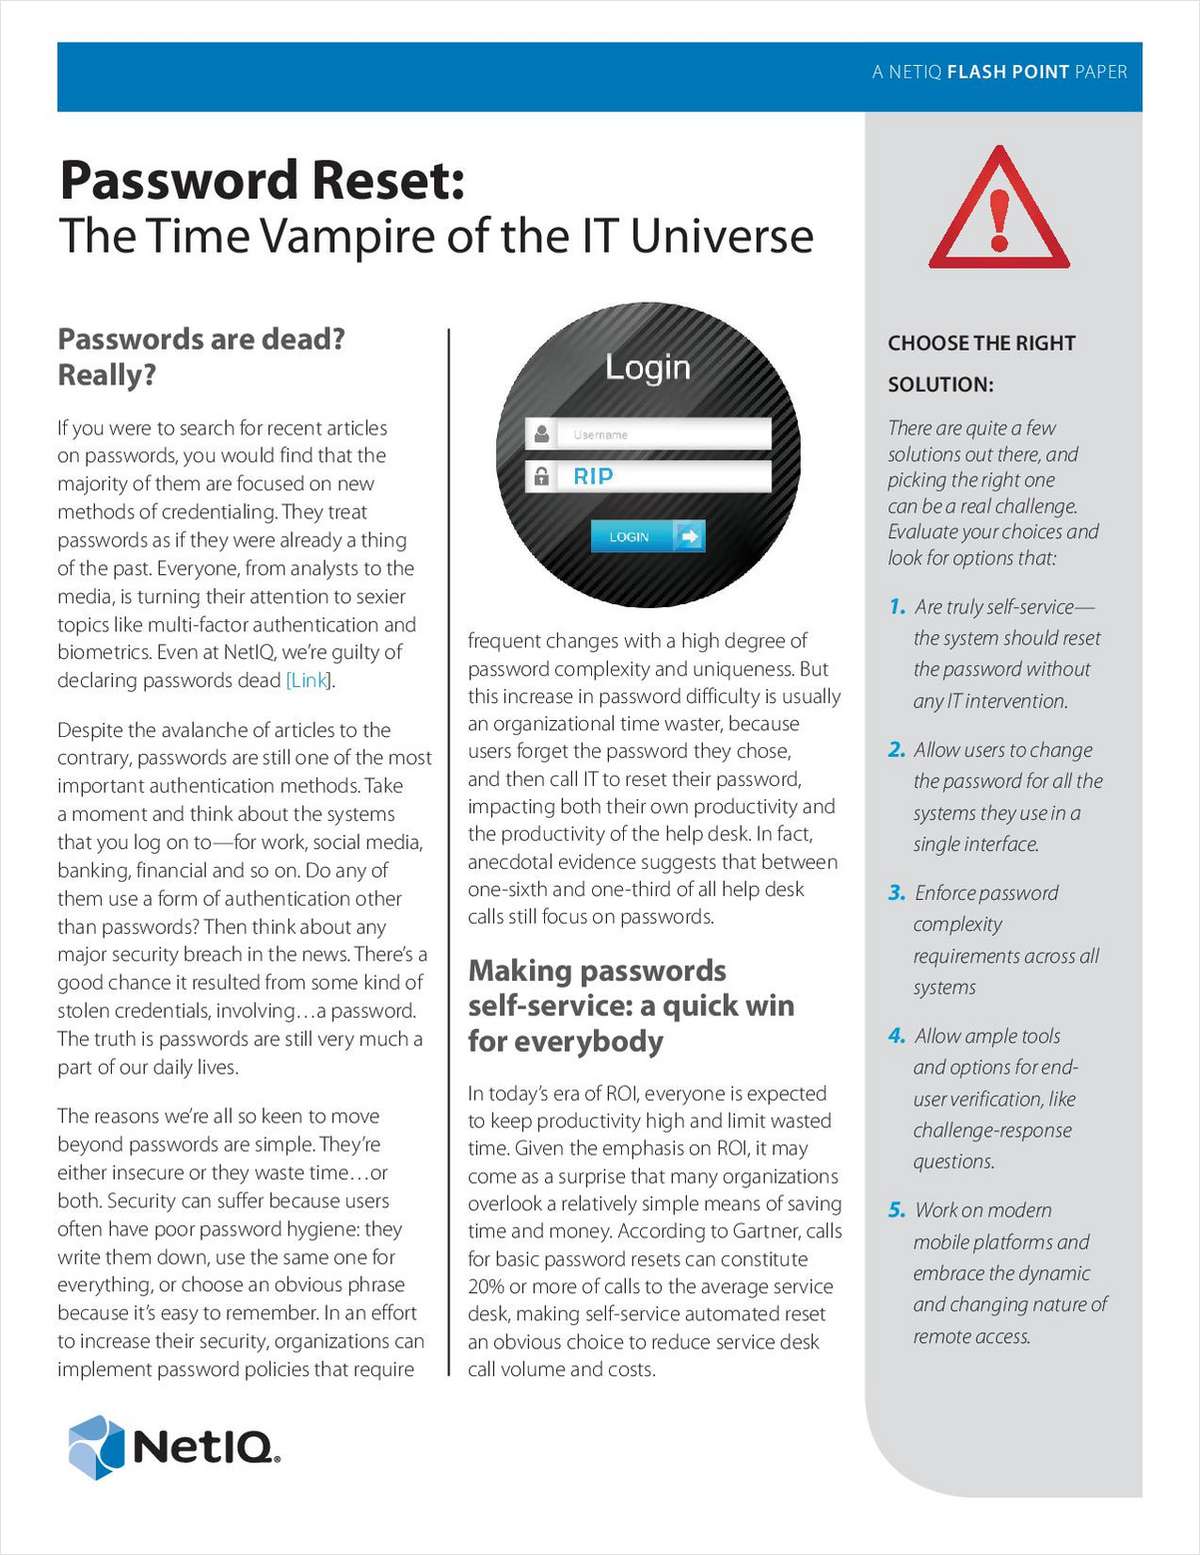 Password Reset: The Time Vampire of the IT Universe